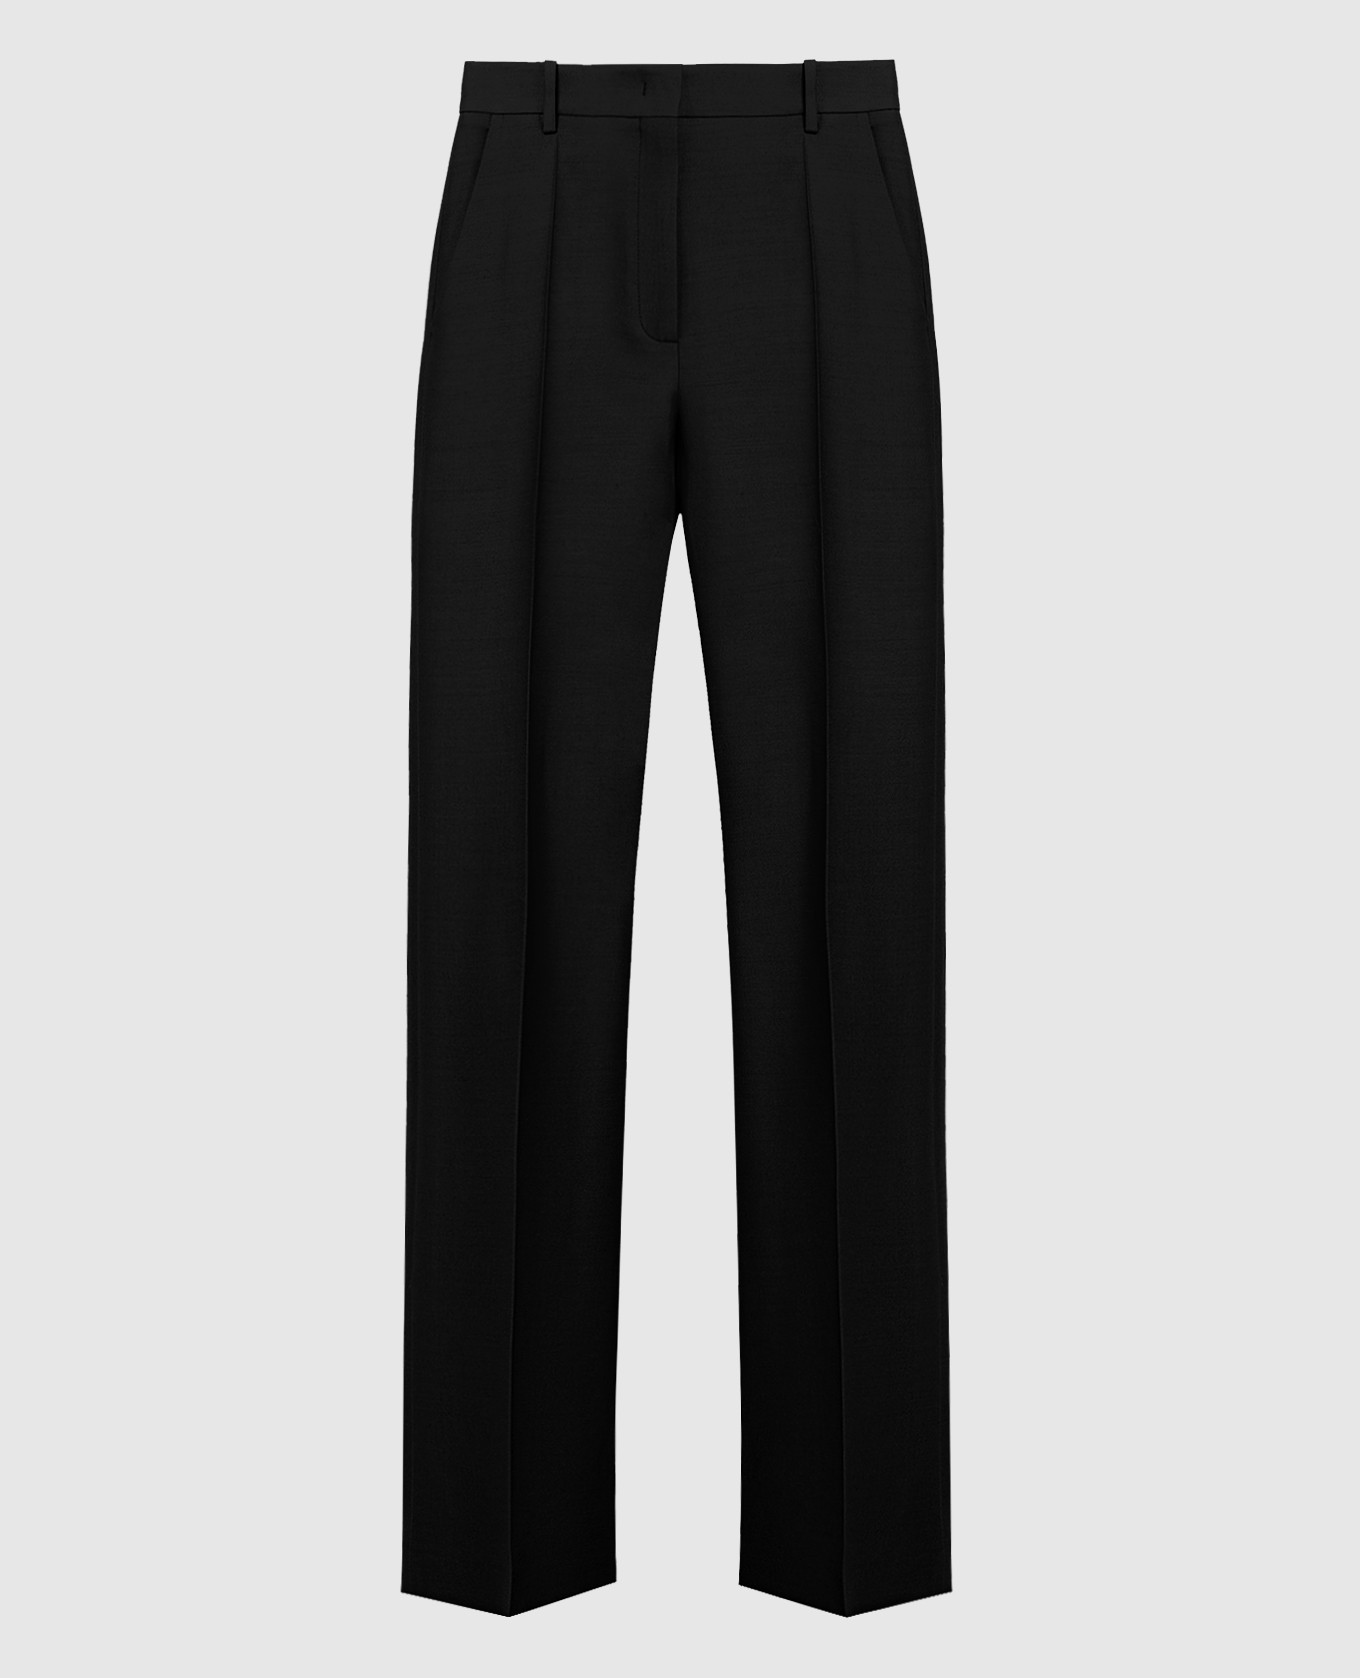 Black trousers made of wool and silk